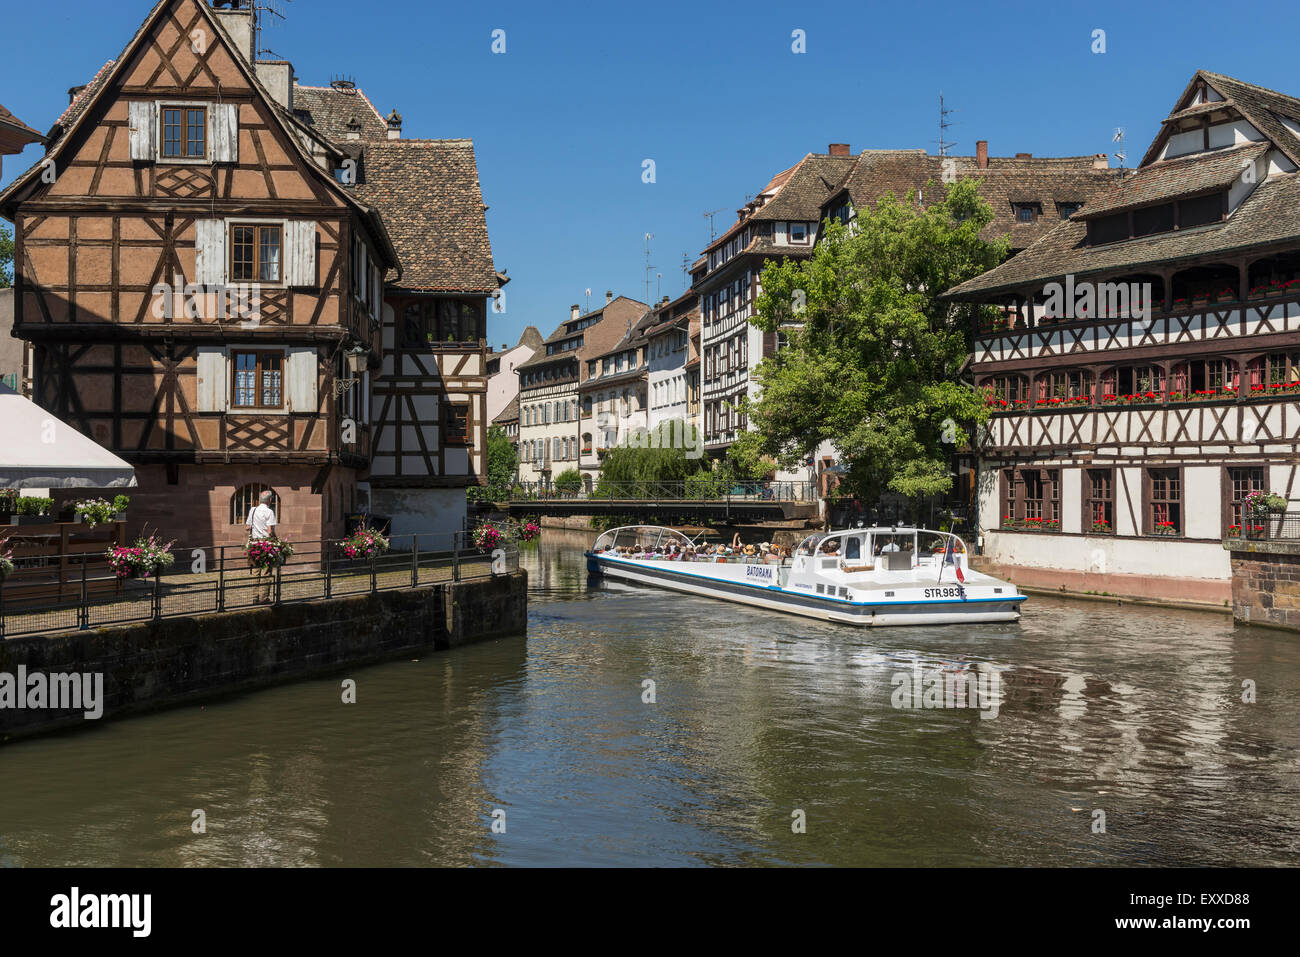 La Petite France, Old town, in Strasbourg, France, Europe, with tour boat Stock Photo